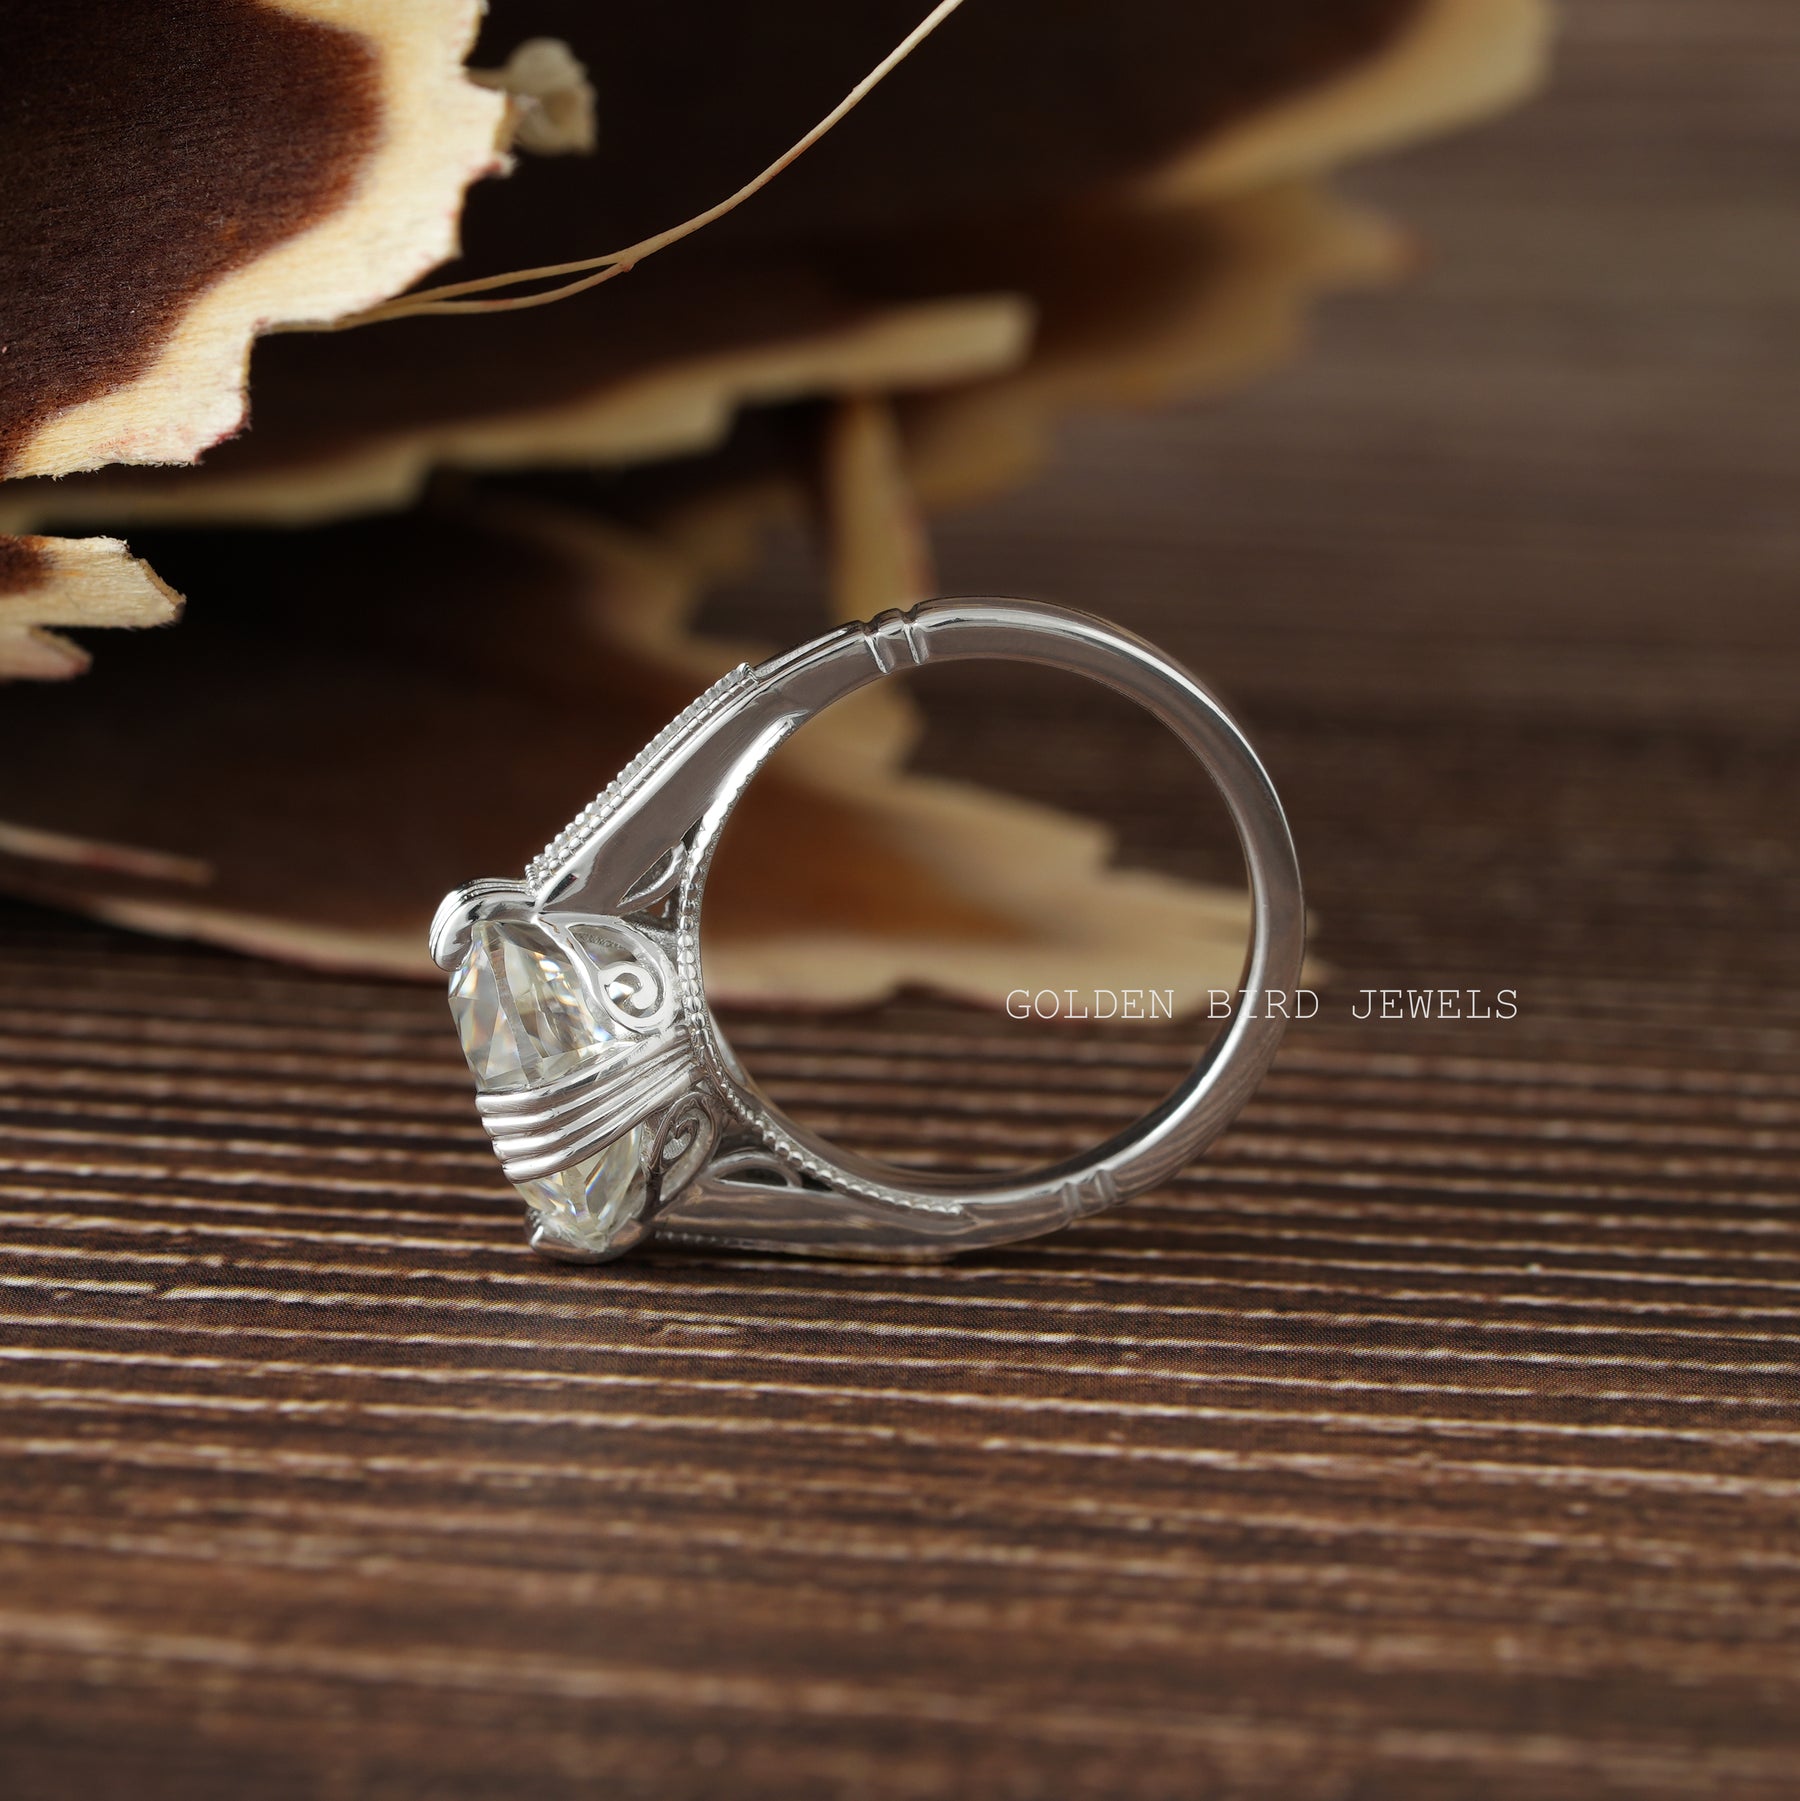 [A white gold ring with a colorless round cut stone in the middle]-[Golden Bird Jewels]